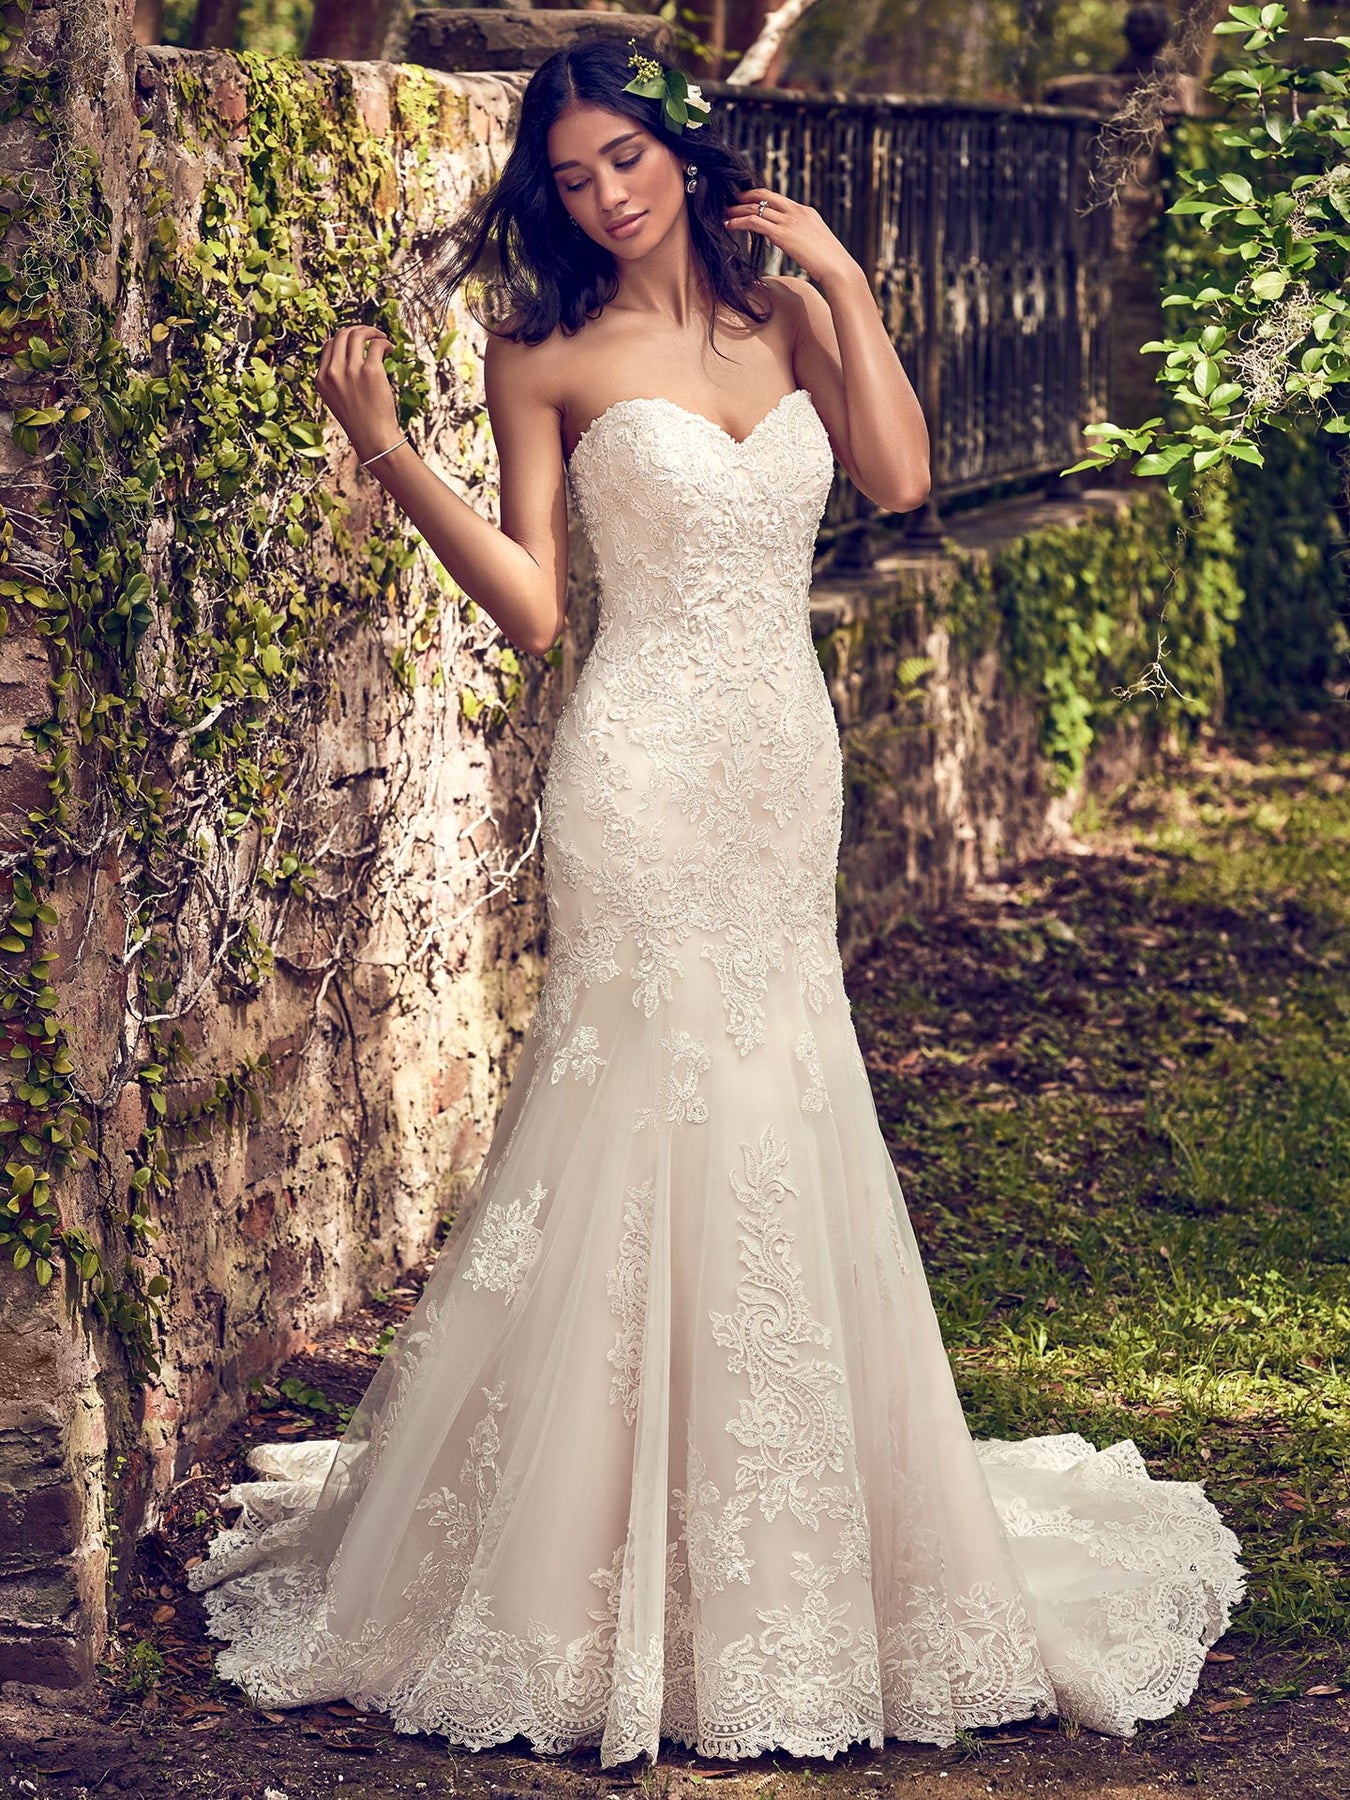 Juanita Louise by Maggie Sottero Wedding Dresses and Accessories